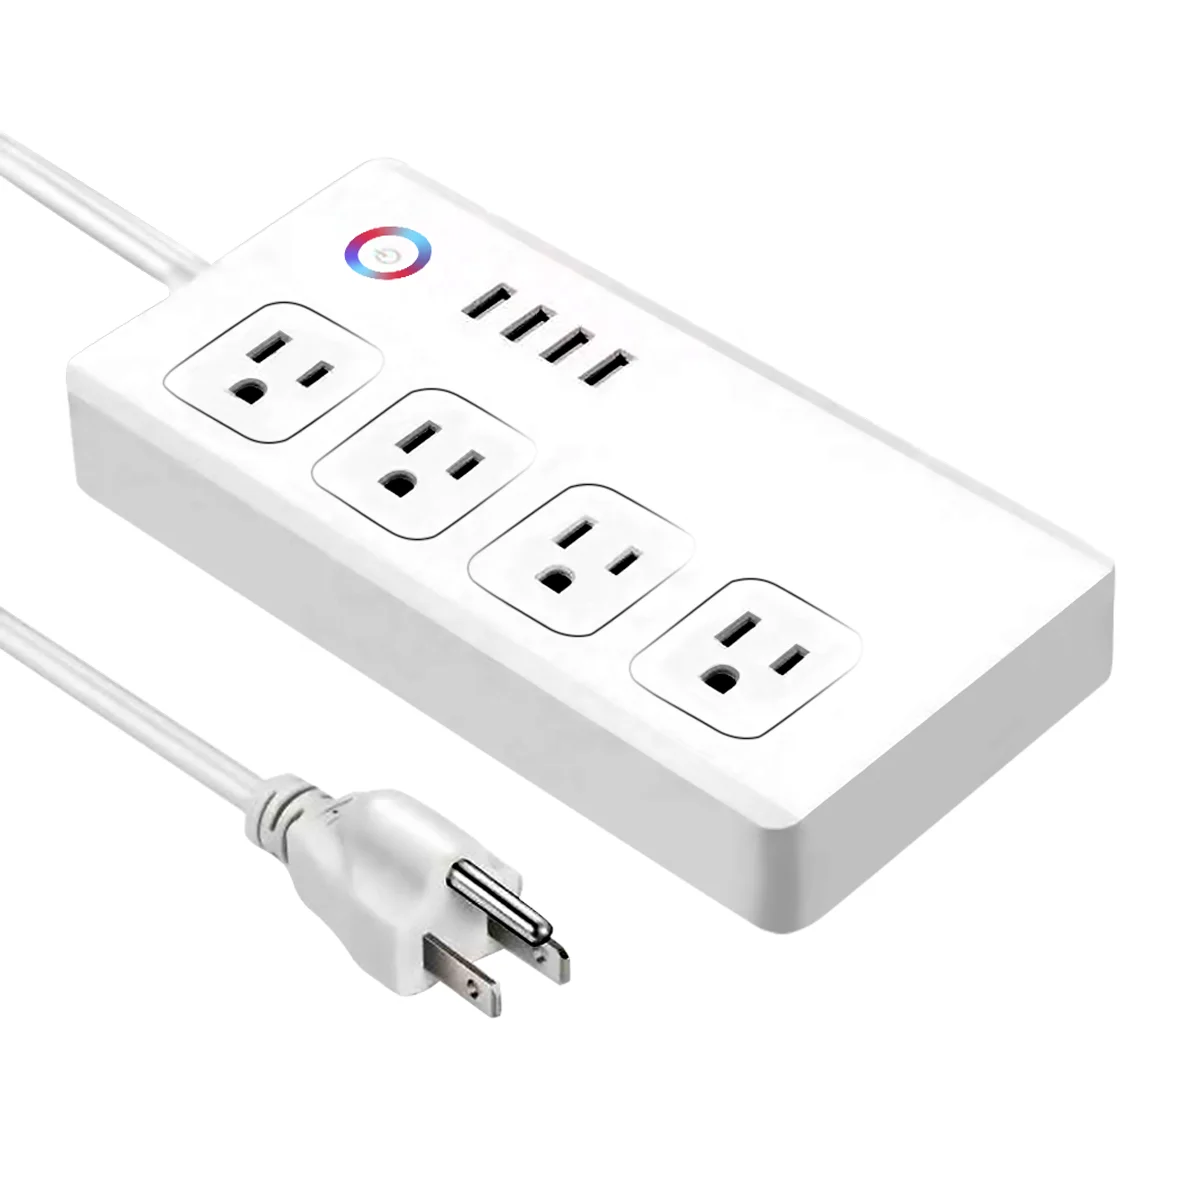 Hot Sell USA Smart Wifi LED Light Plug WiFi Smart Home Power Strip Surge Protector with 4 AC Outlets and 4 USB Ports